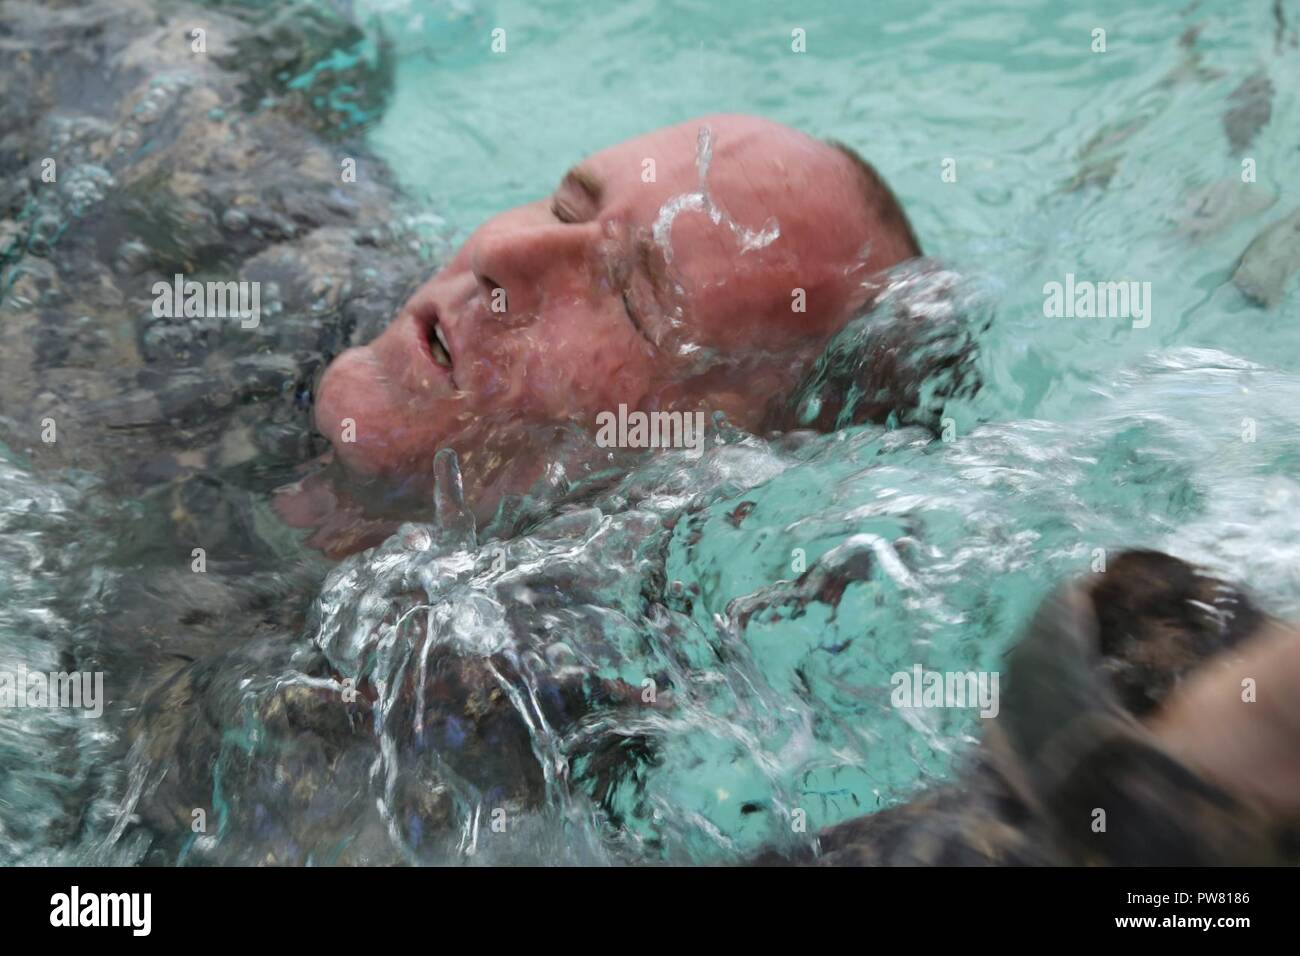 U.S. Army Staff Sgt. Eric Sullivan, assigned to the Blanchfield Army Community Hospital, reaches for the pool wall during the 2017 Best Medic Competition at Fort Bragg, N.C., Sept. 19, 2017. The competition tested the physical and mental toughness, as well as the technical competence, of each medic to identify the team moving forward to represent the region at the next level of the competition. Stock Photo